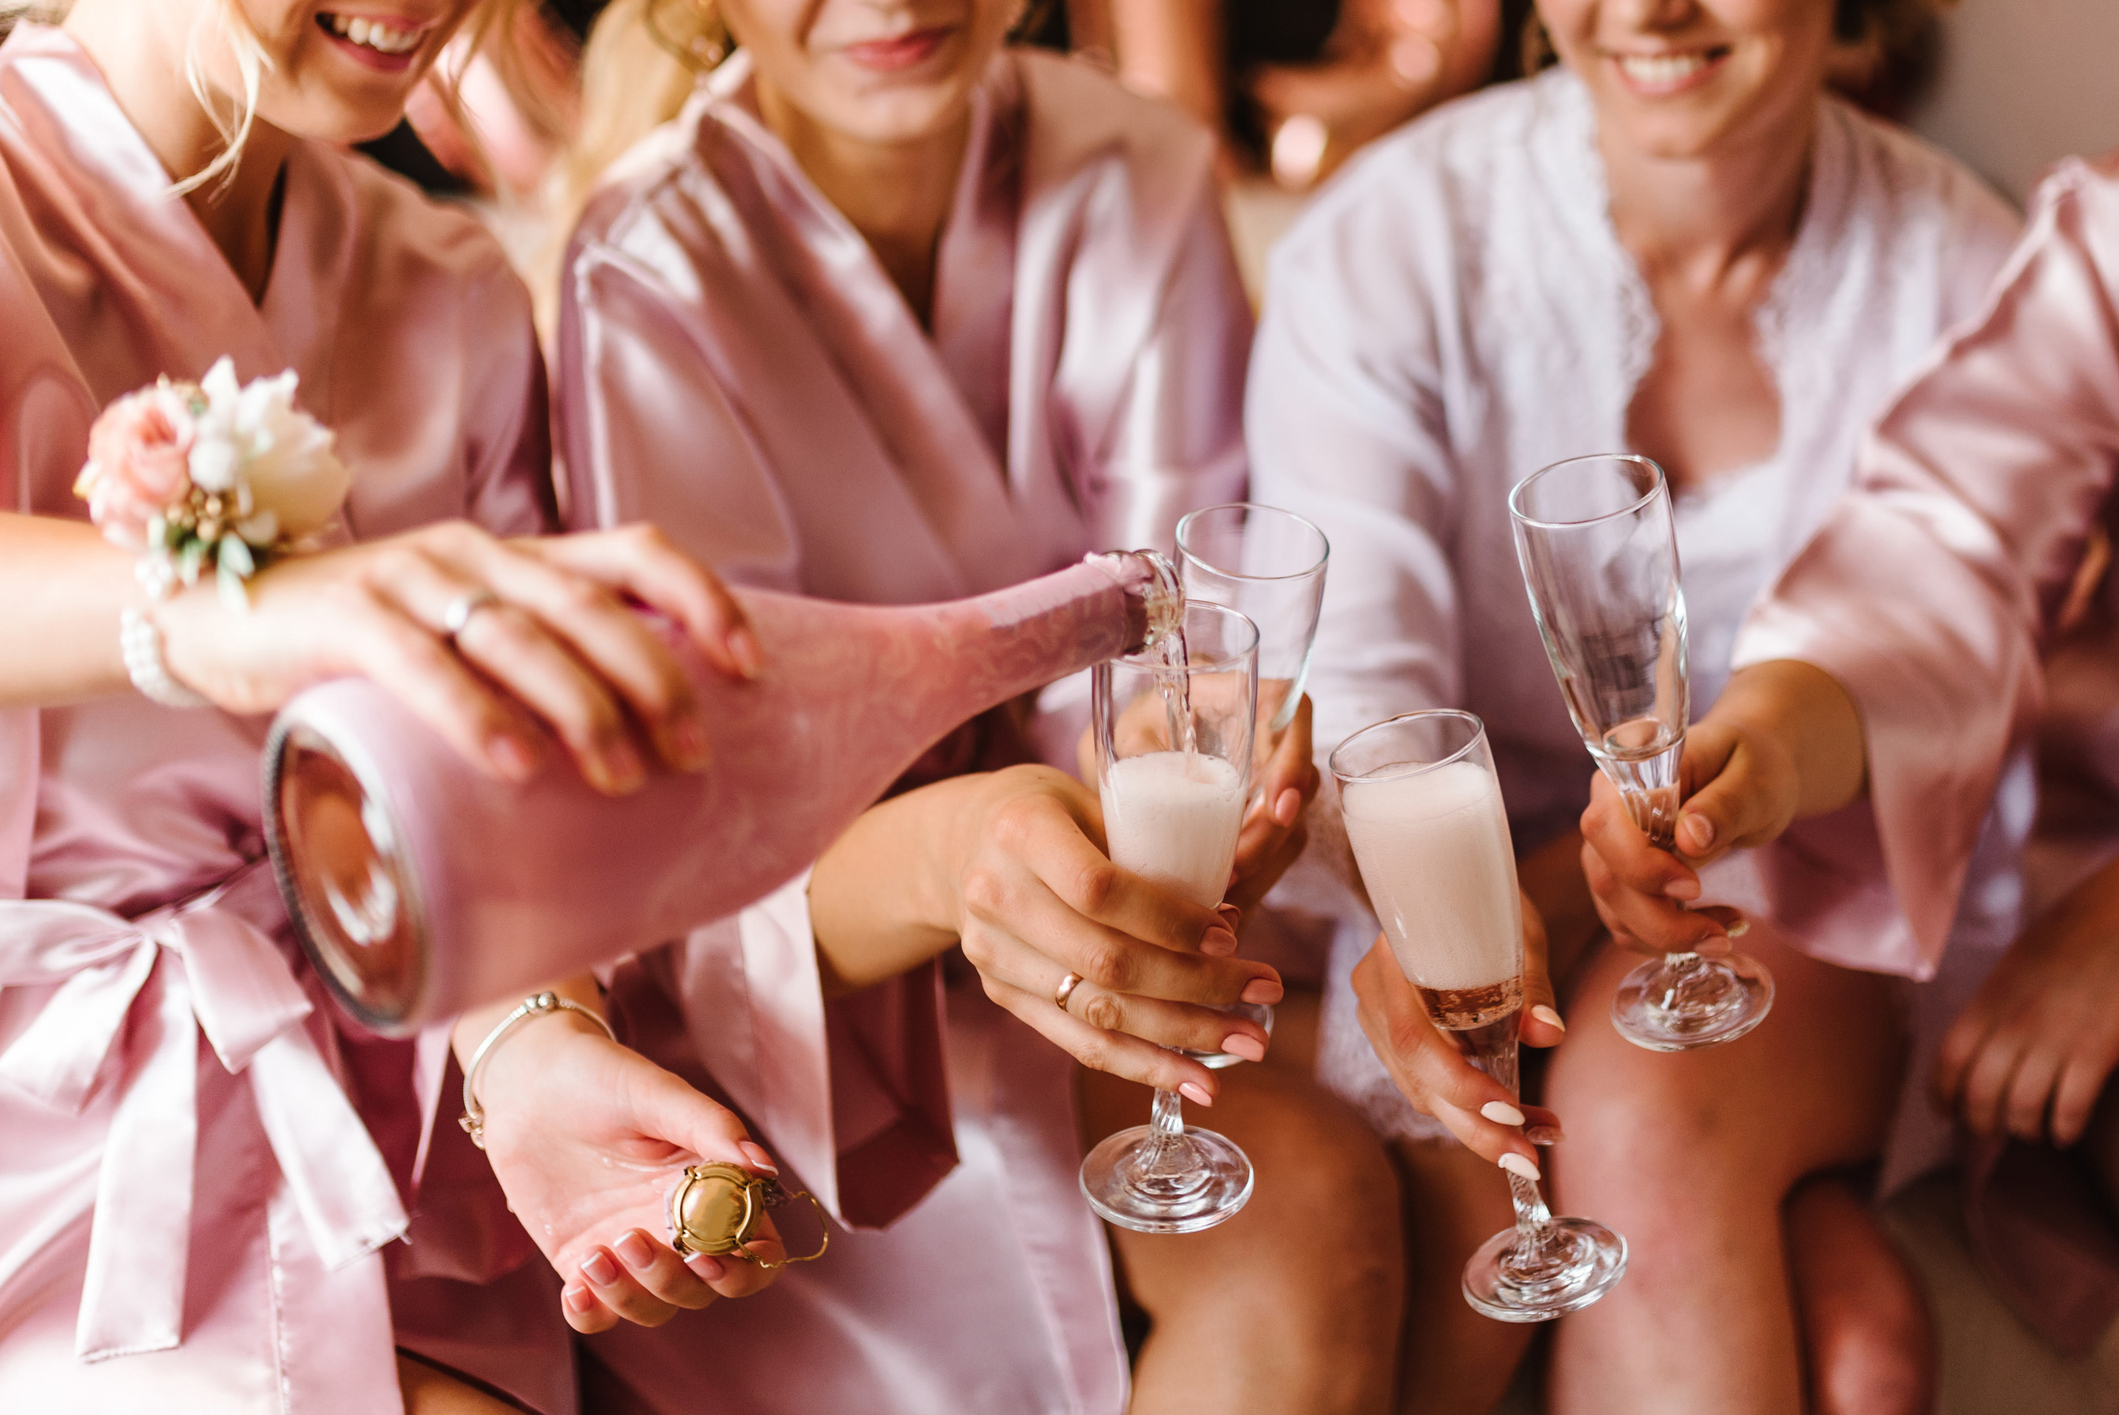 People in robes toasting with champagne, celebratory gathering, focus on glasses